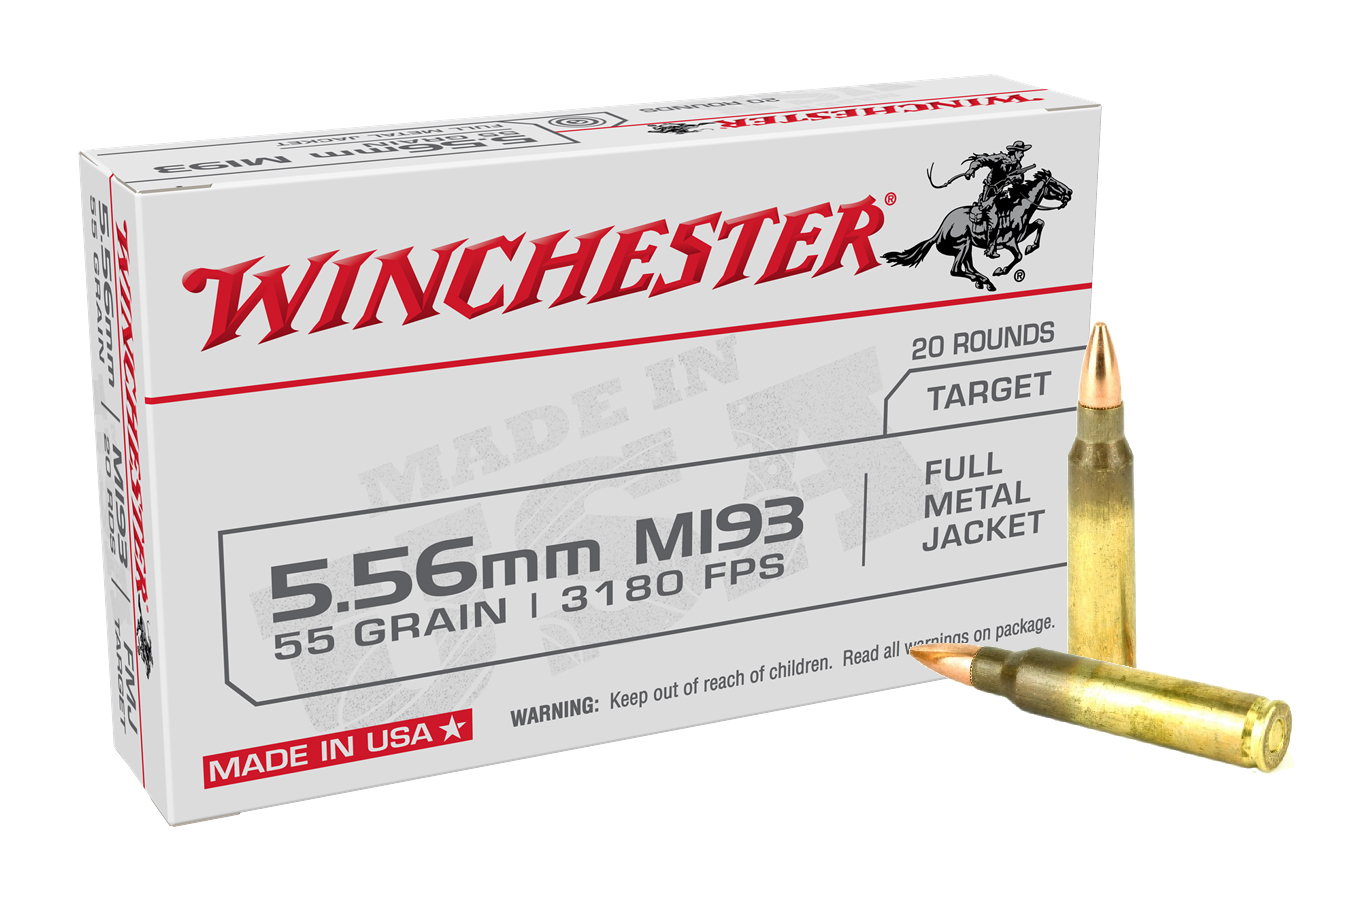 WINCHESTER AMMO 5.56MM 55 GR FMJ